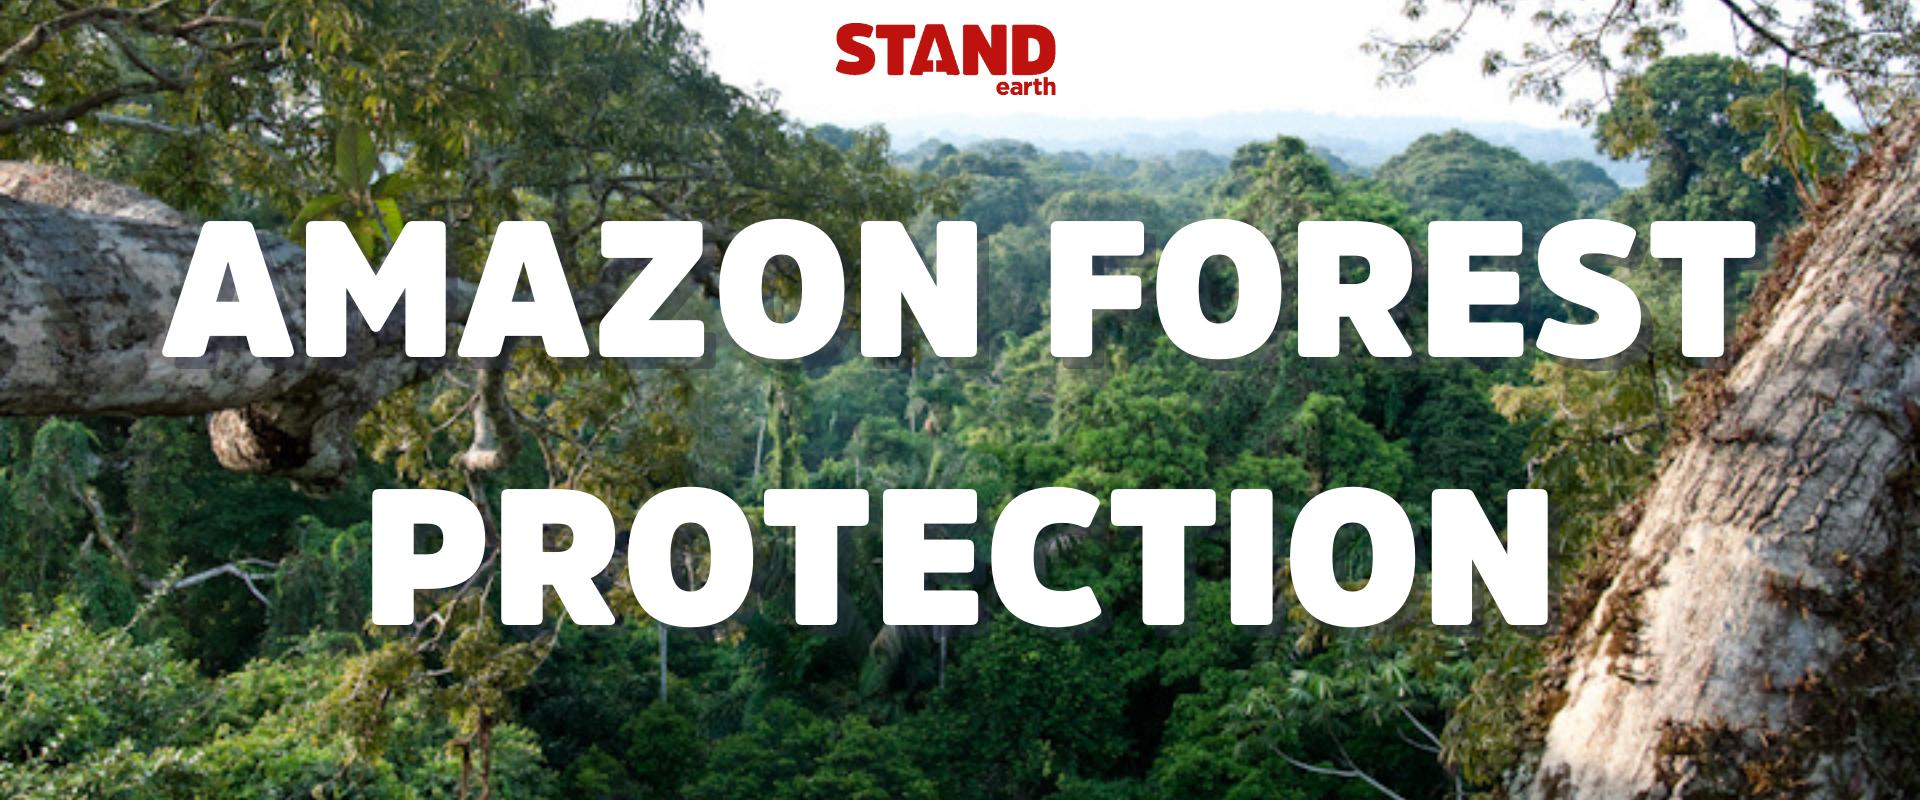 Overview of the Amazon rainforest, with white bold text reading, "Amazon Forest Protection" in the center and above it is the Stand logo in red.